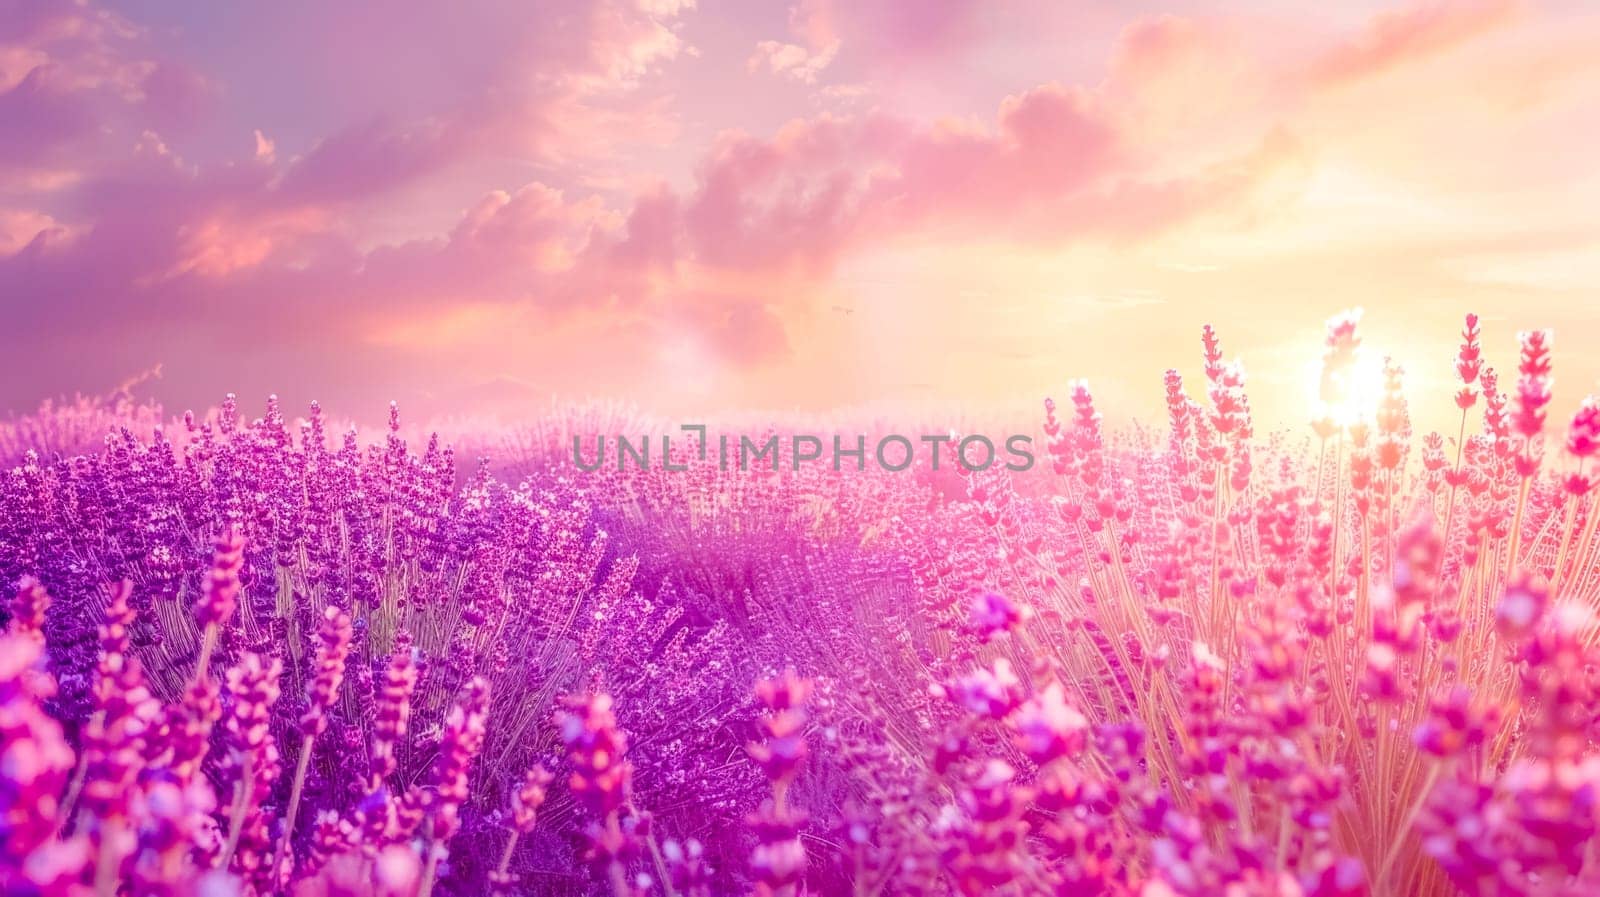 Dreamy lavender field at sunset by Edophoto